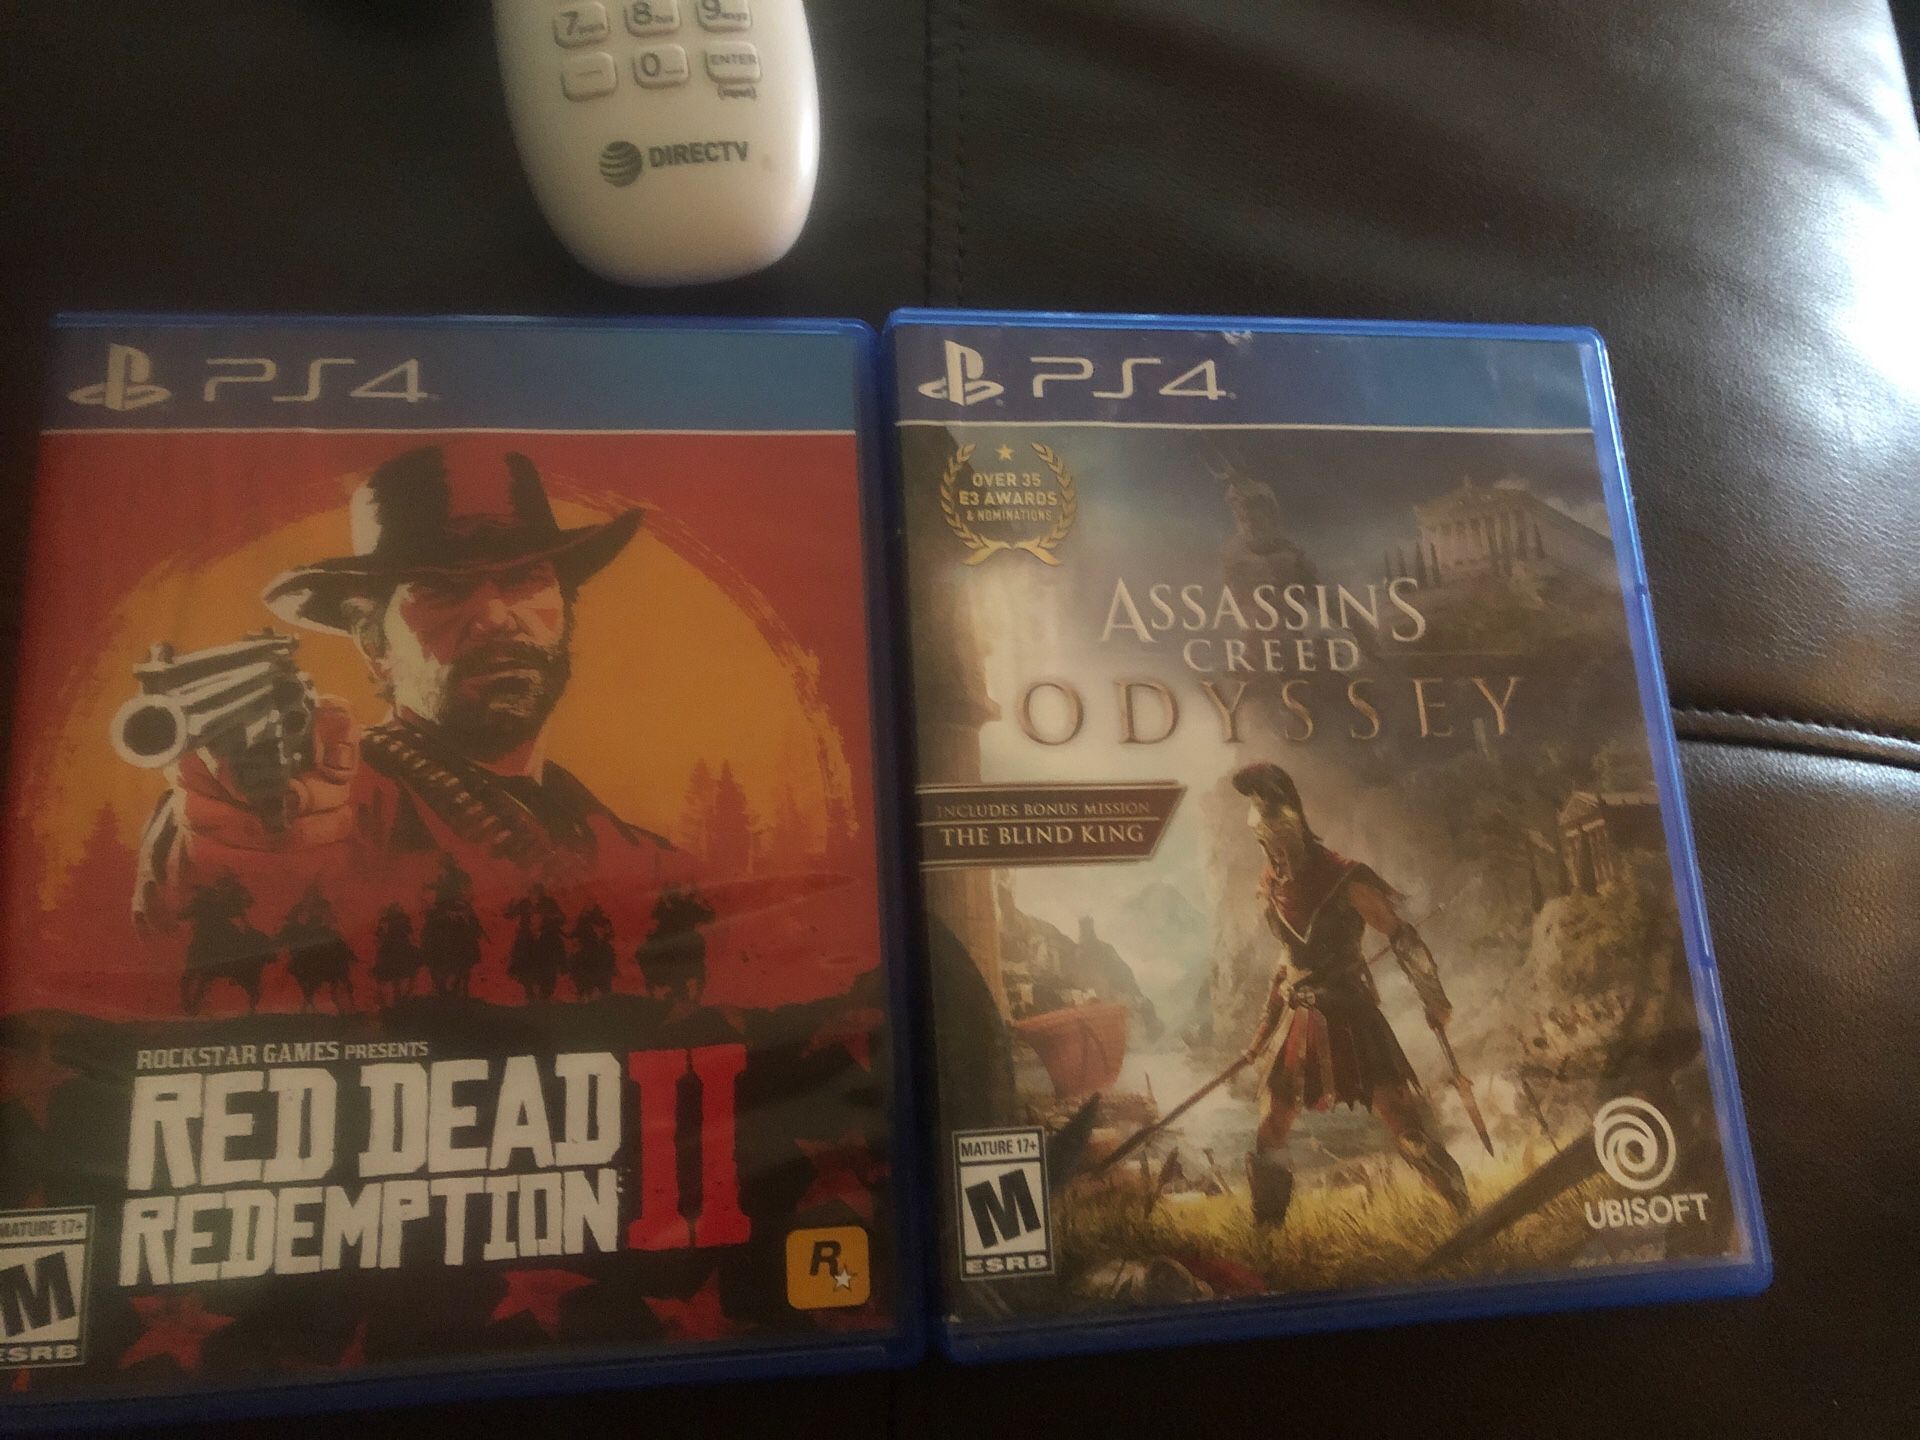 Red dead redemption 2 and Assassins creed odyssey